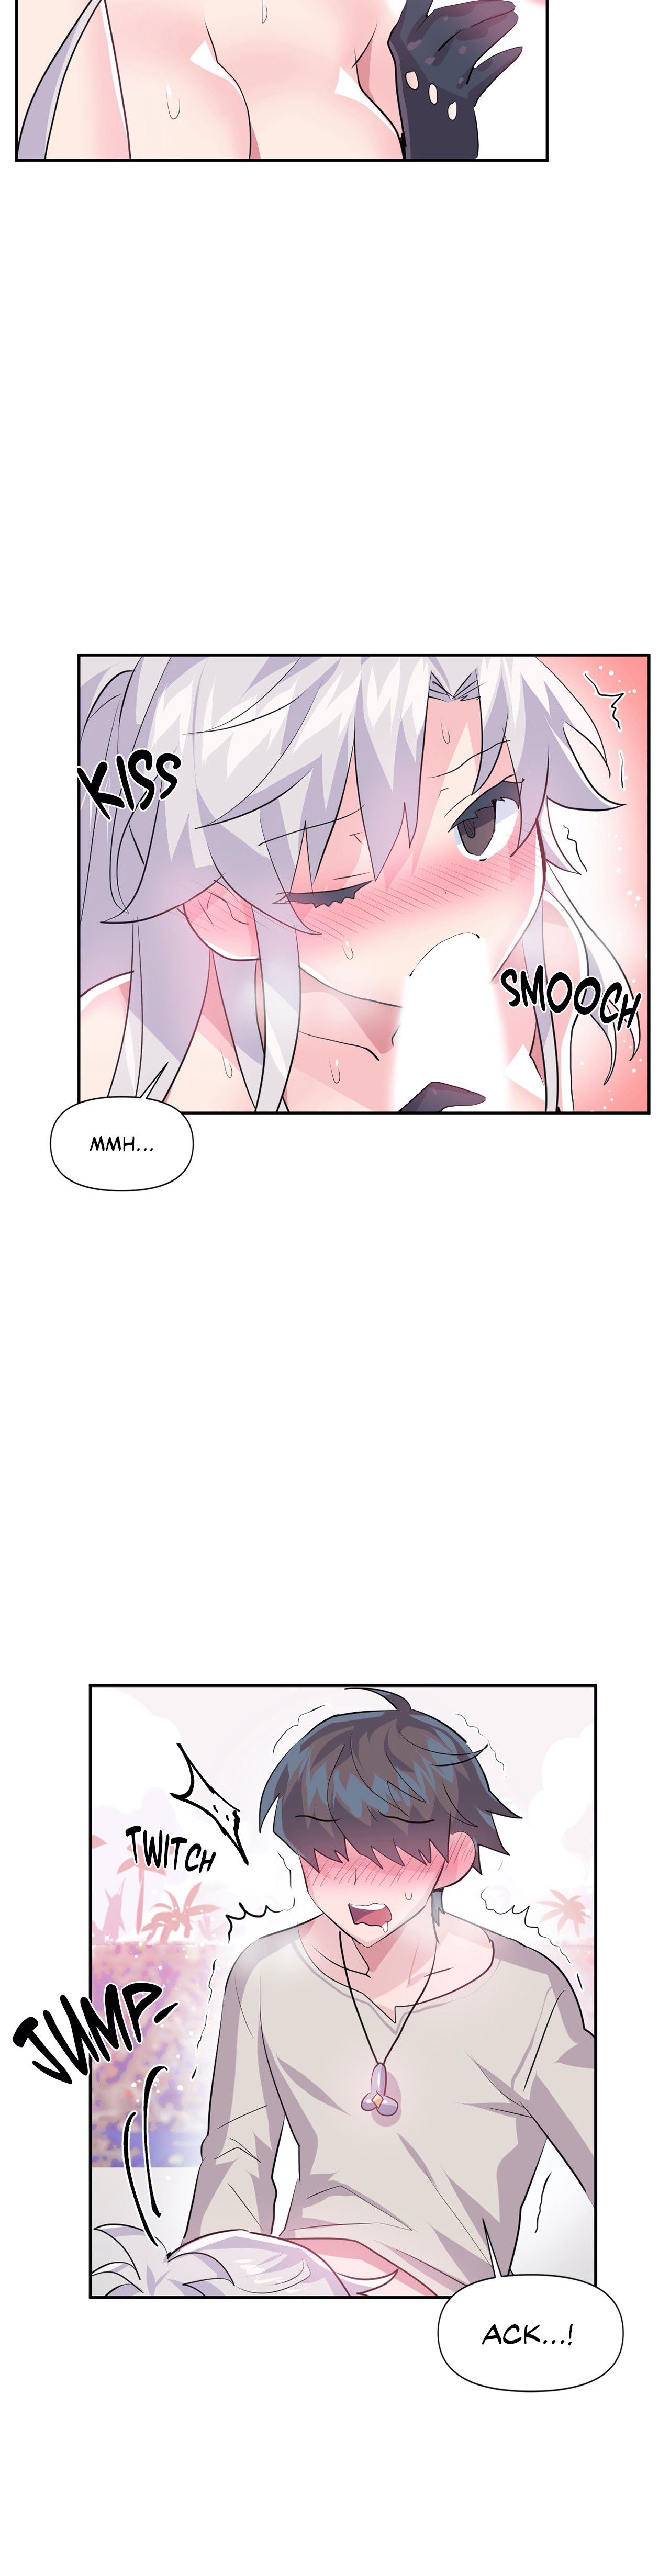 log-in-to-lust-a-land-chap-31-3